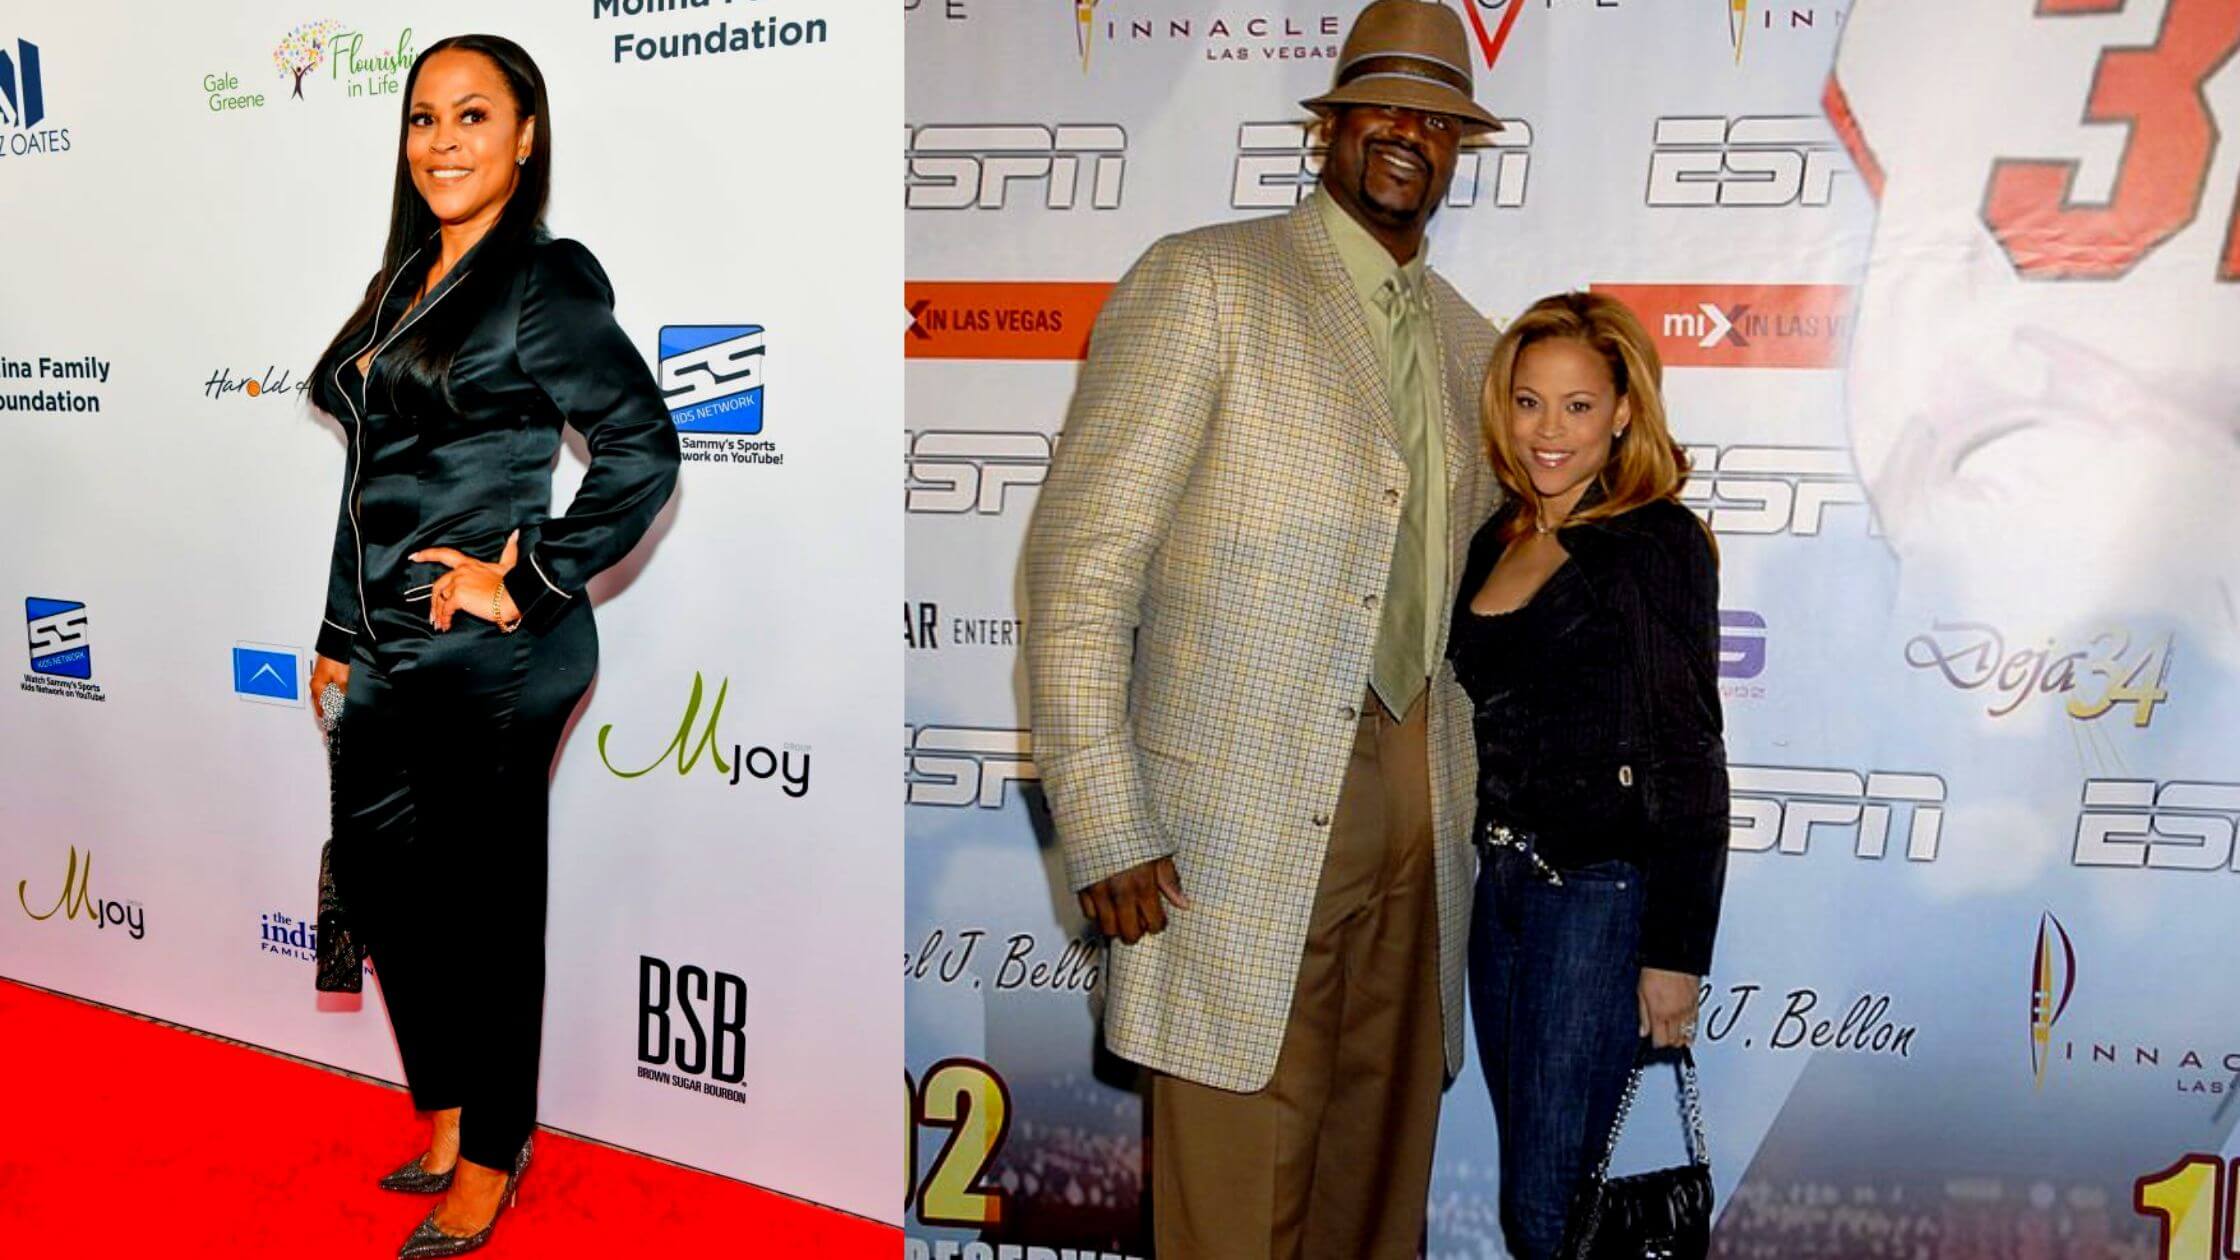 Comparing Shaunie O'Neal's Height To That Of Other Celebrity Spouses